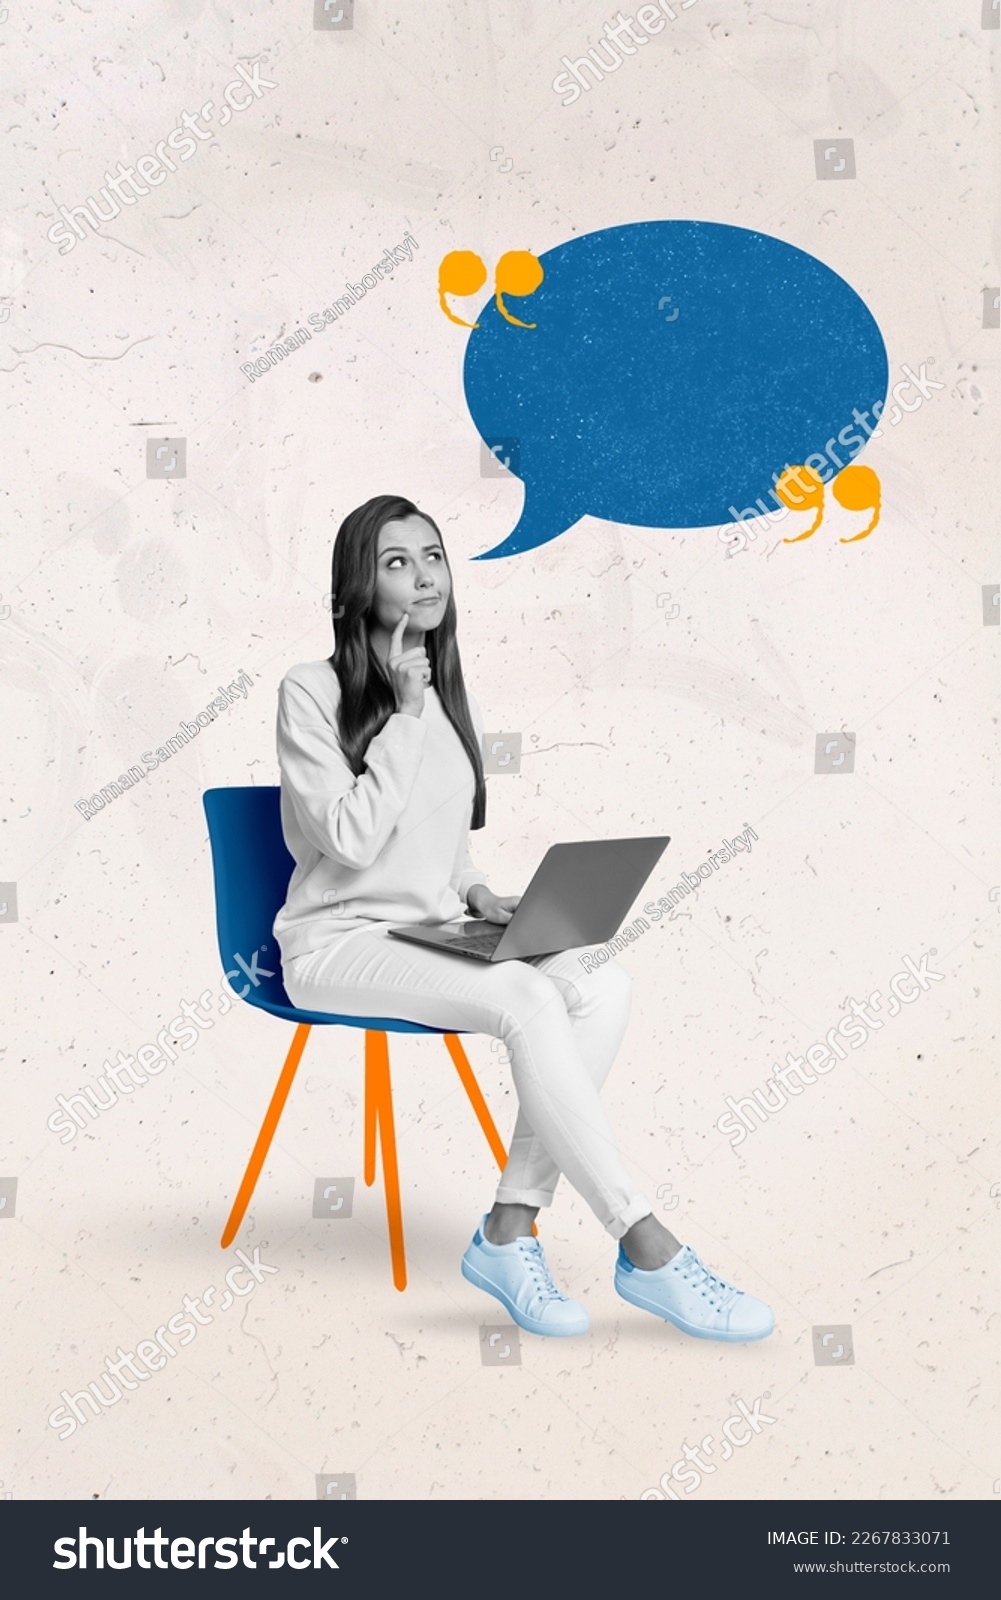 Photo poster of smart minded girl brainstorming creative ideas phrase chatterbox deep think while online conference laptop isolated white background #2267833071